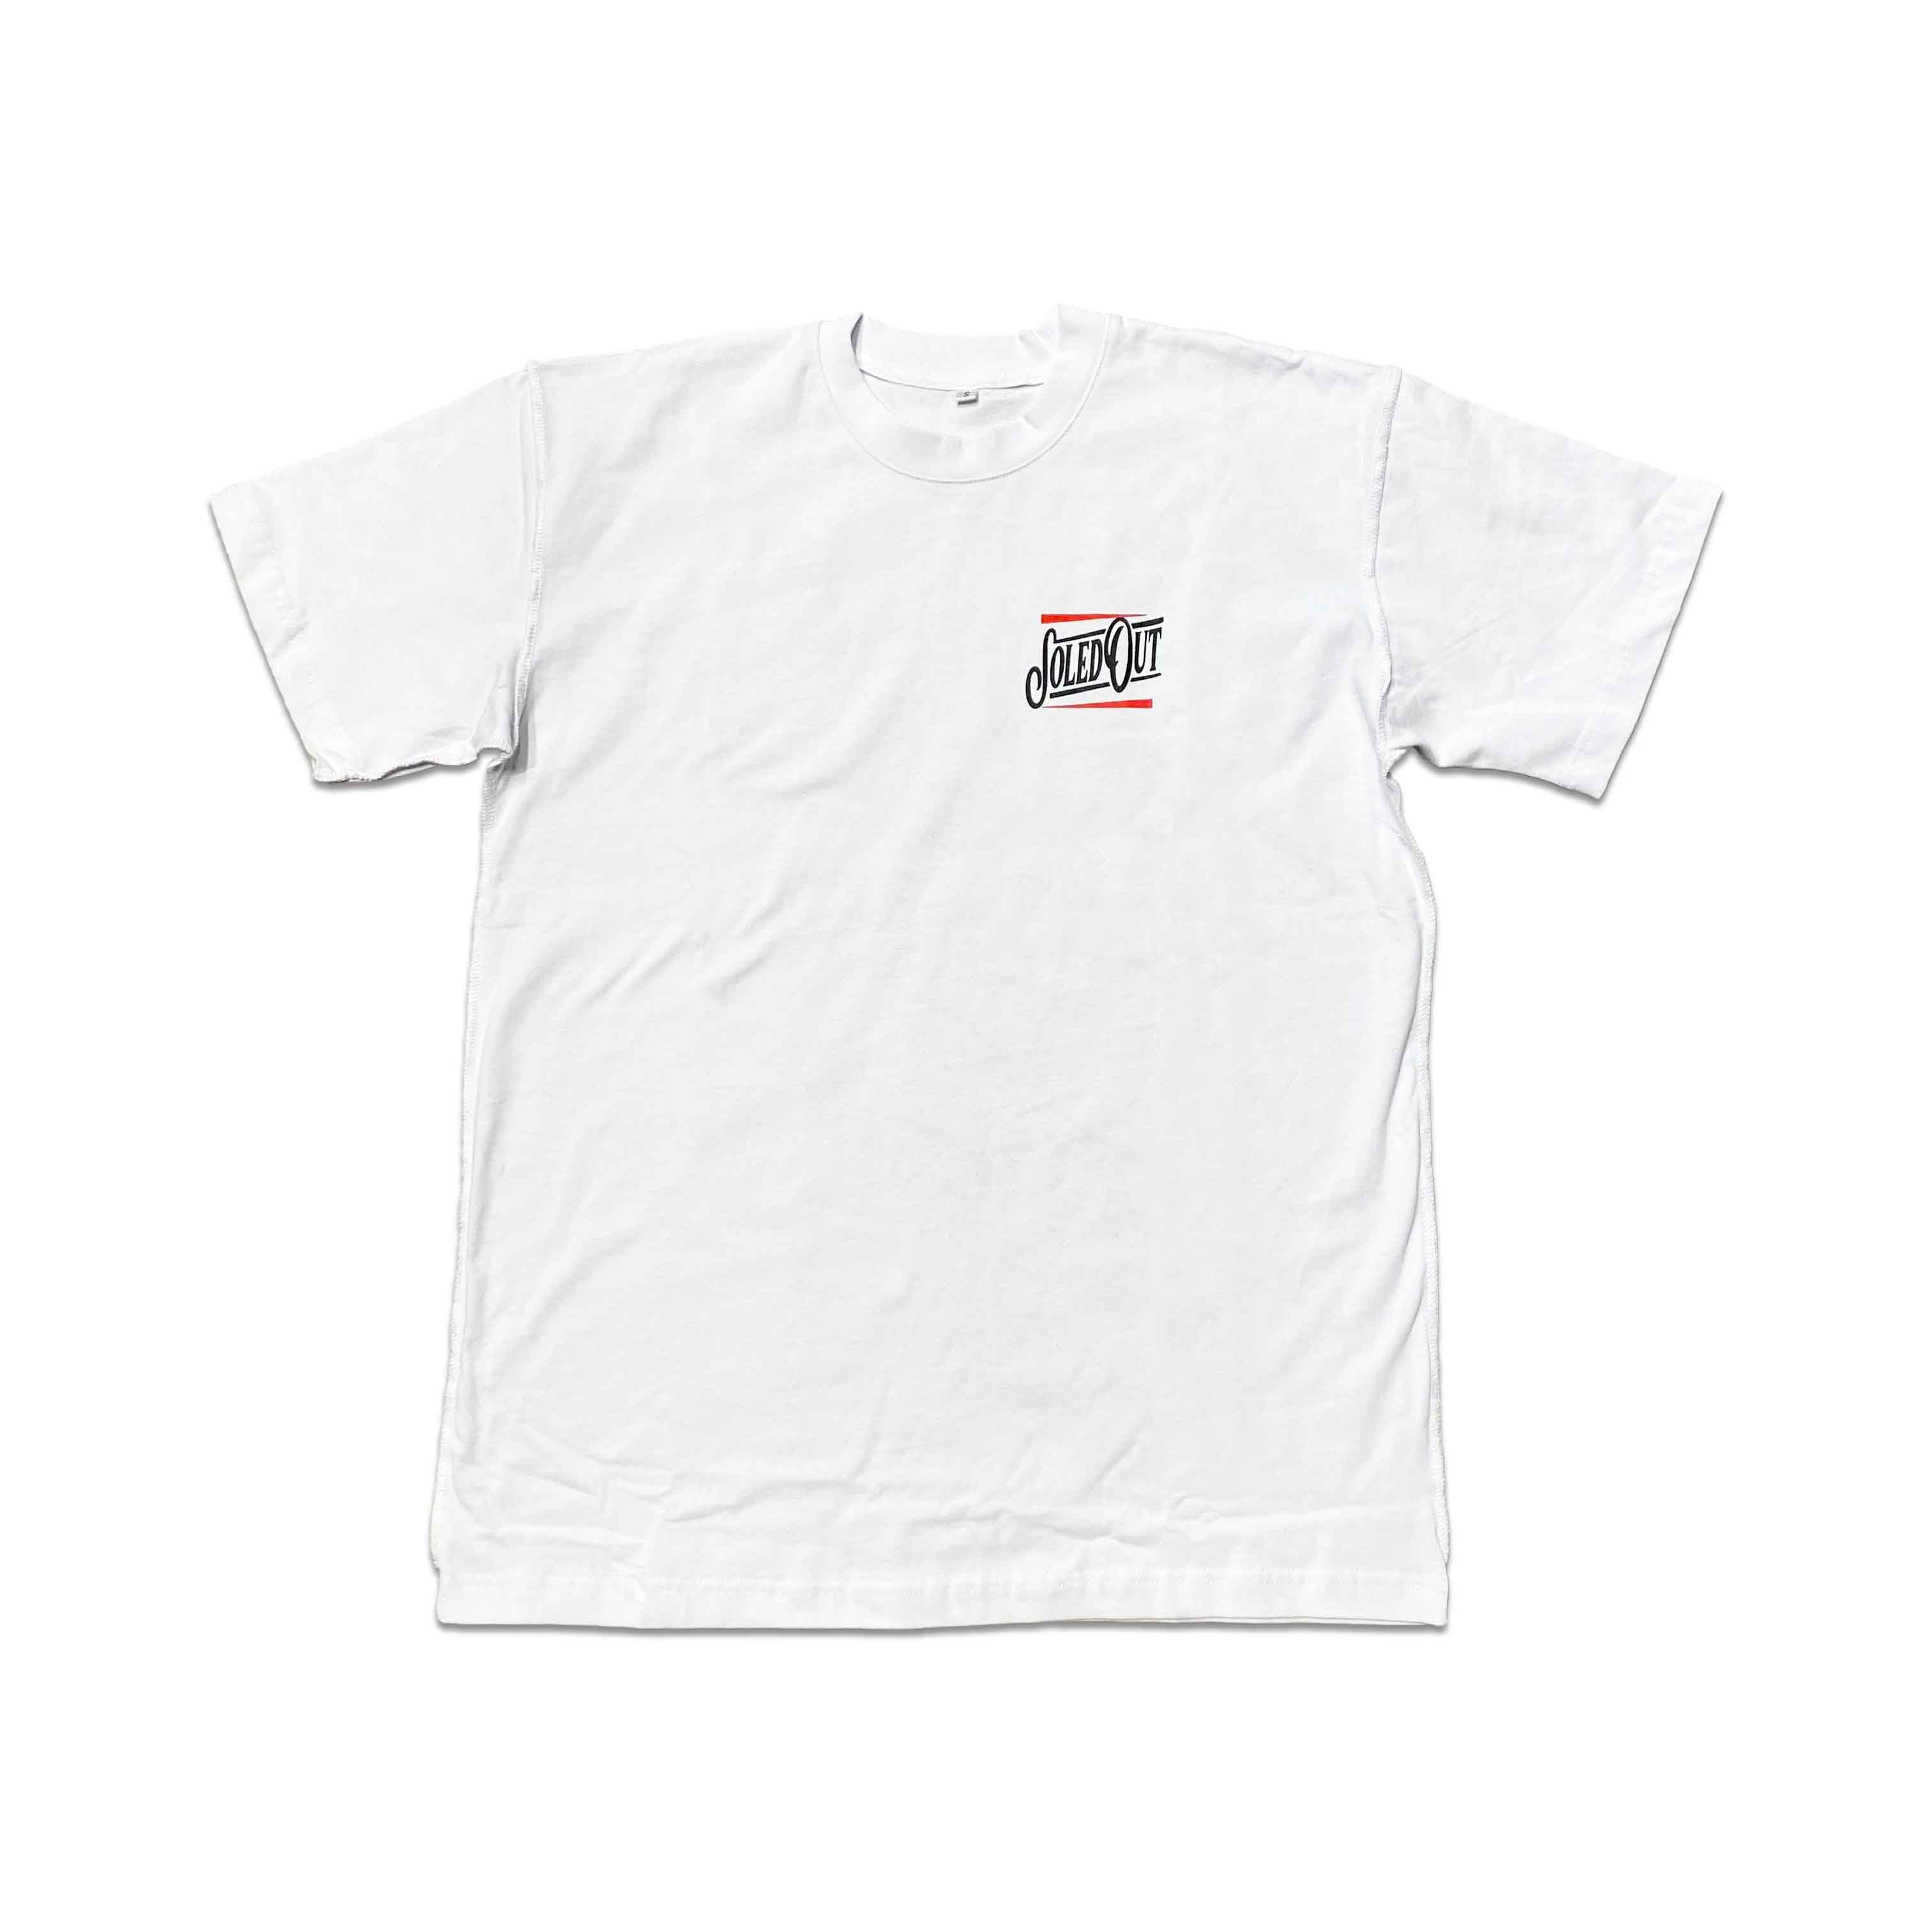 Soled Out T-Shirt &quot;ADVERTISEMENT&quot; White New Size M